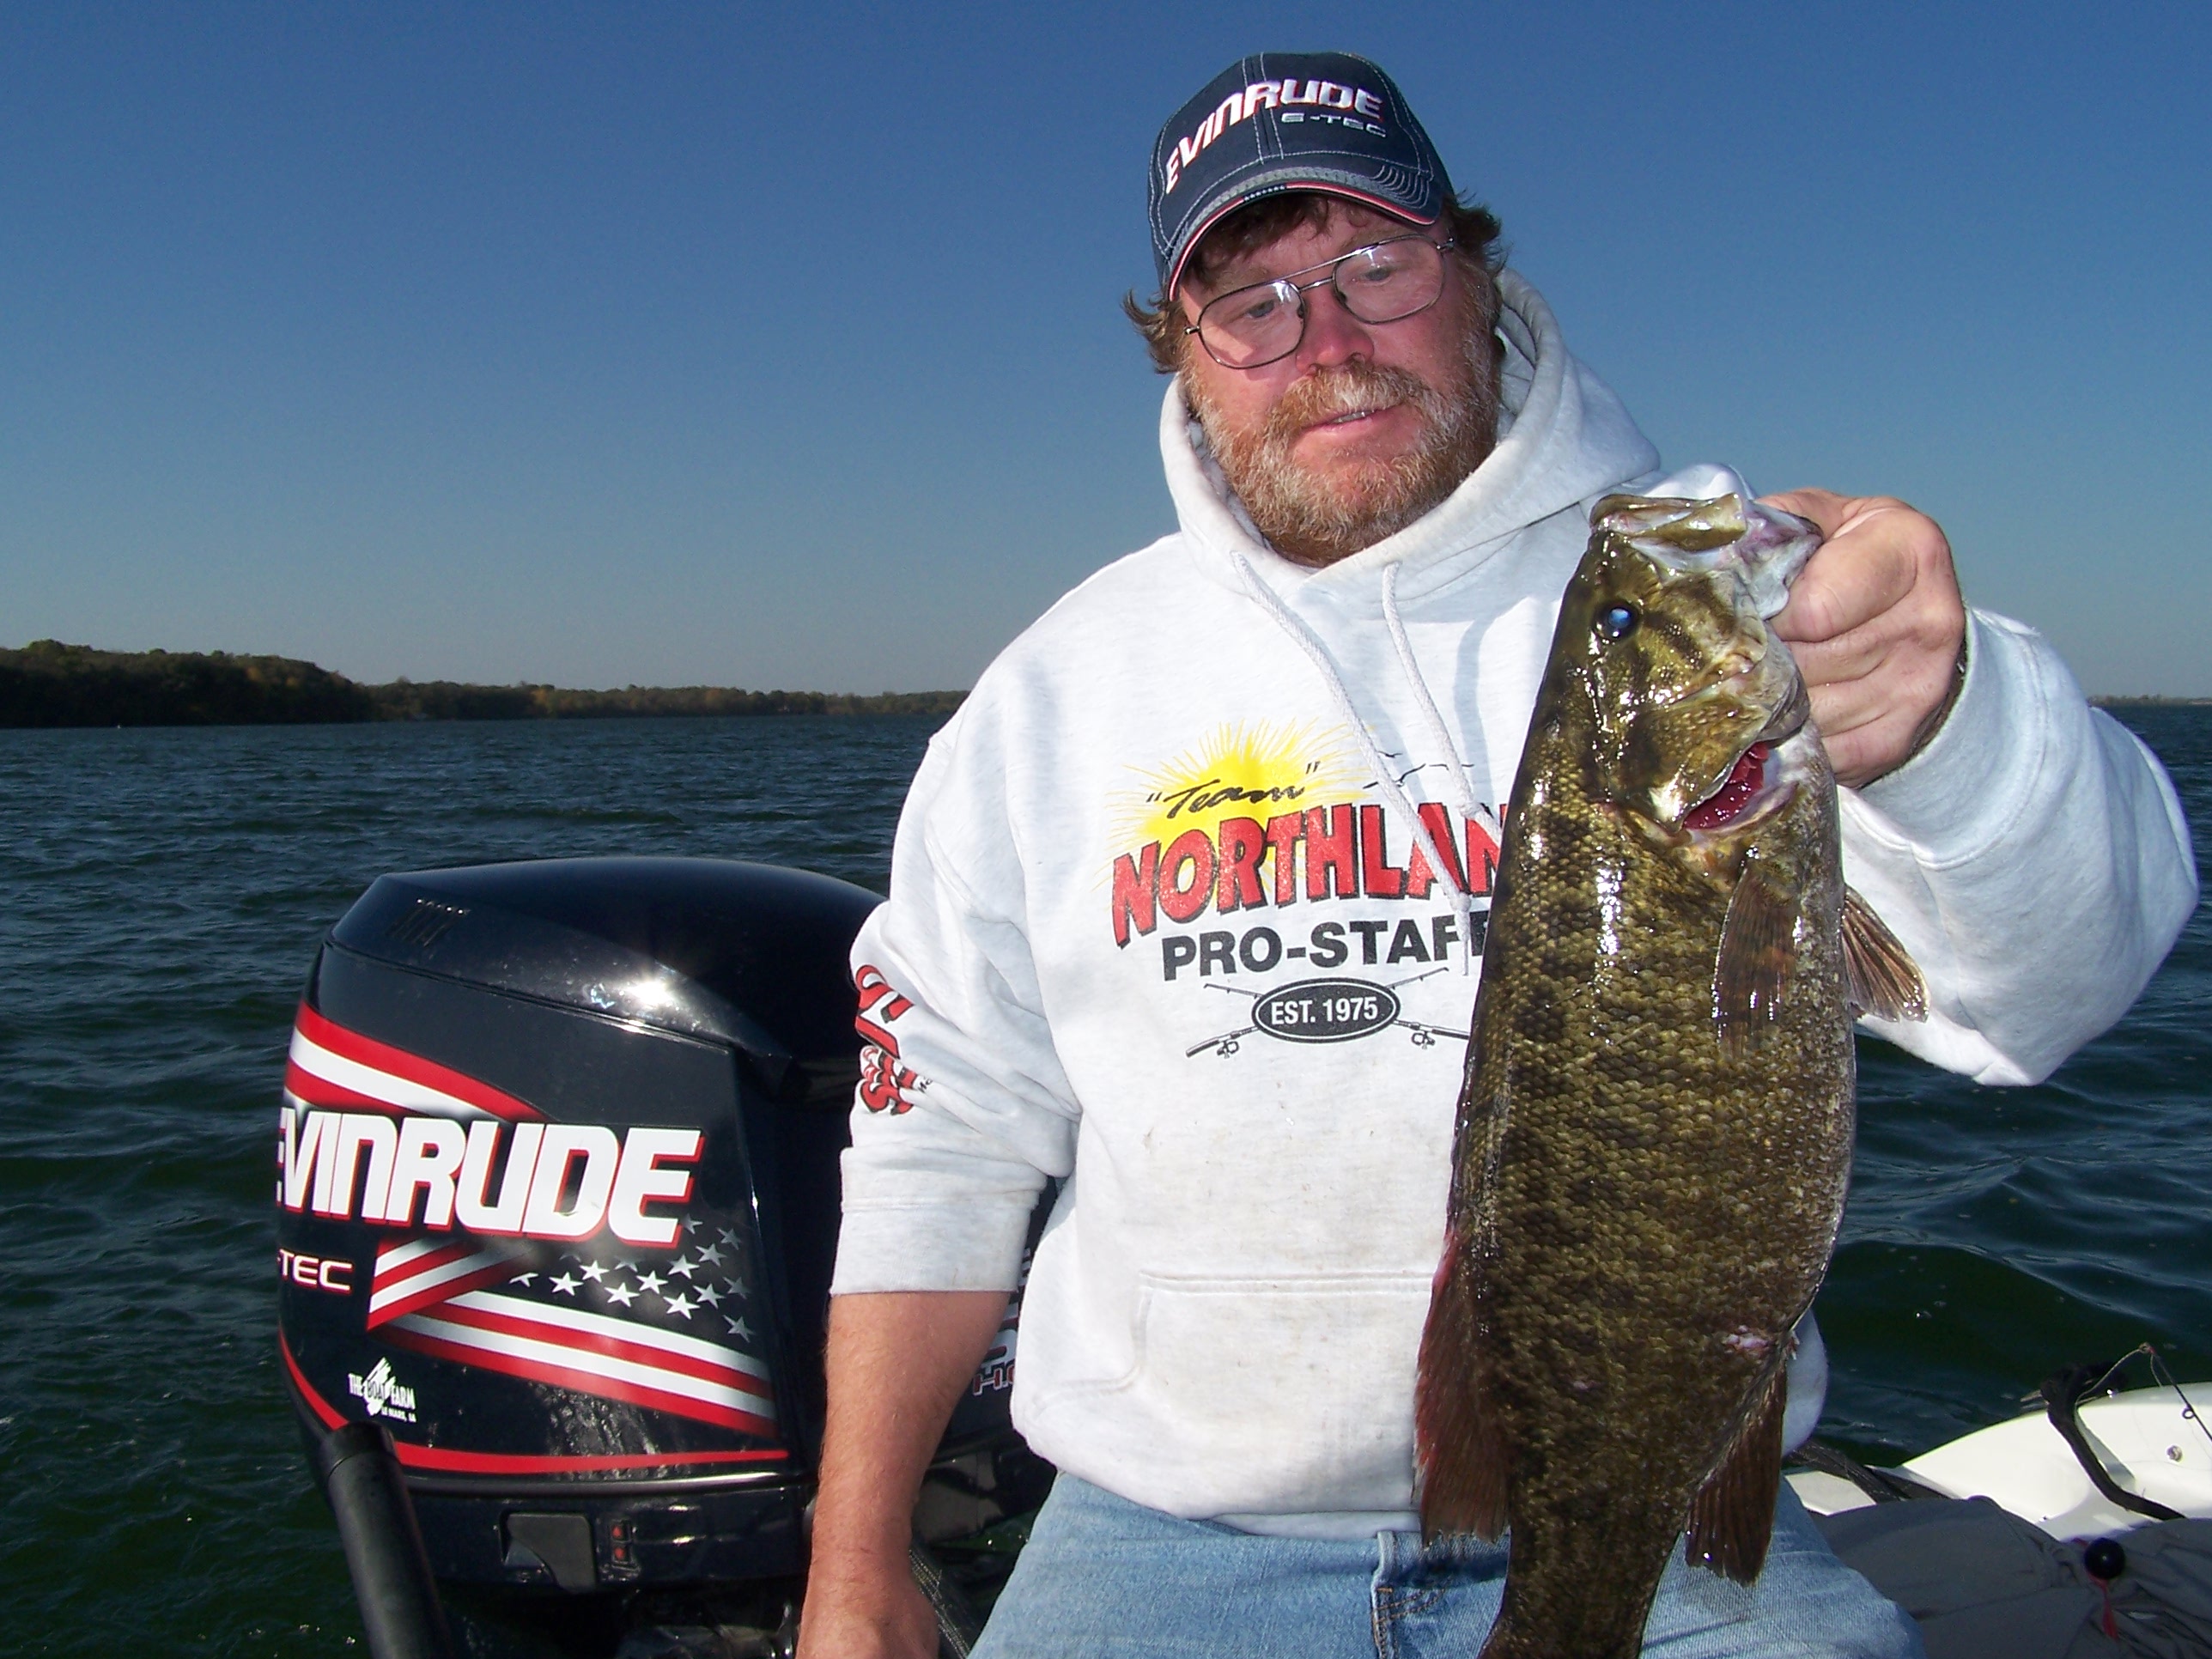 New ideas for fishing, caught this smallmouth bass